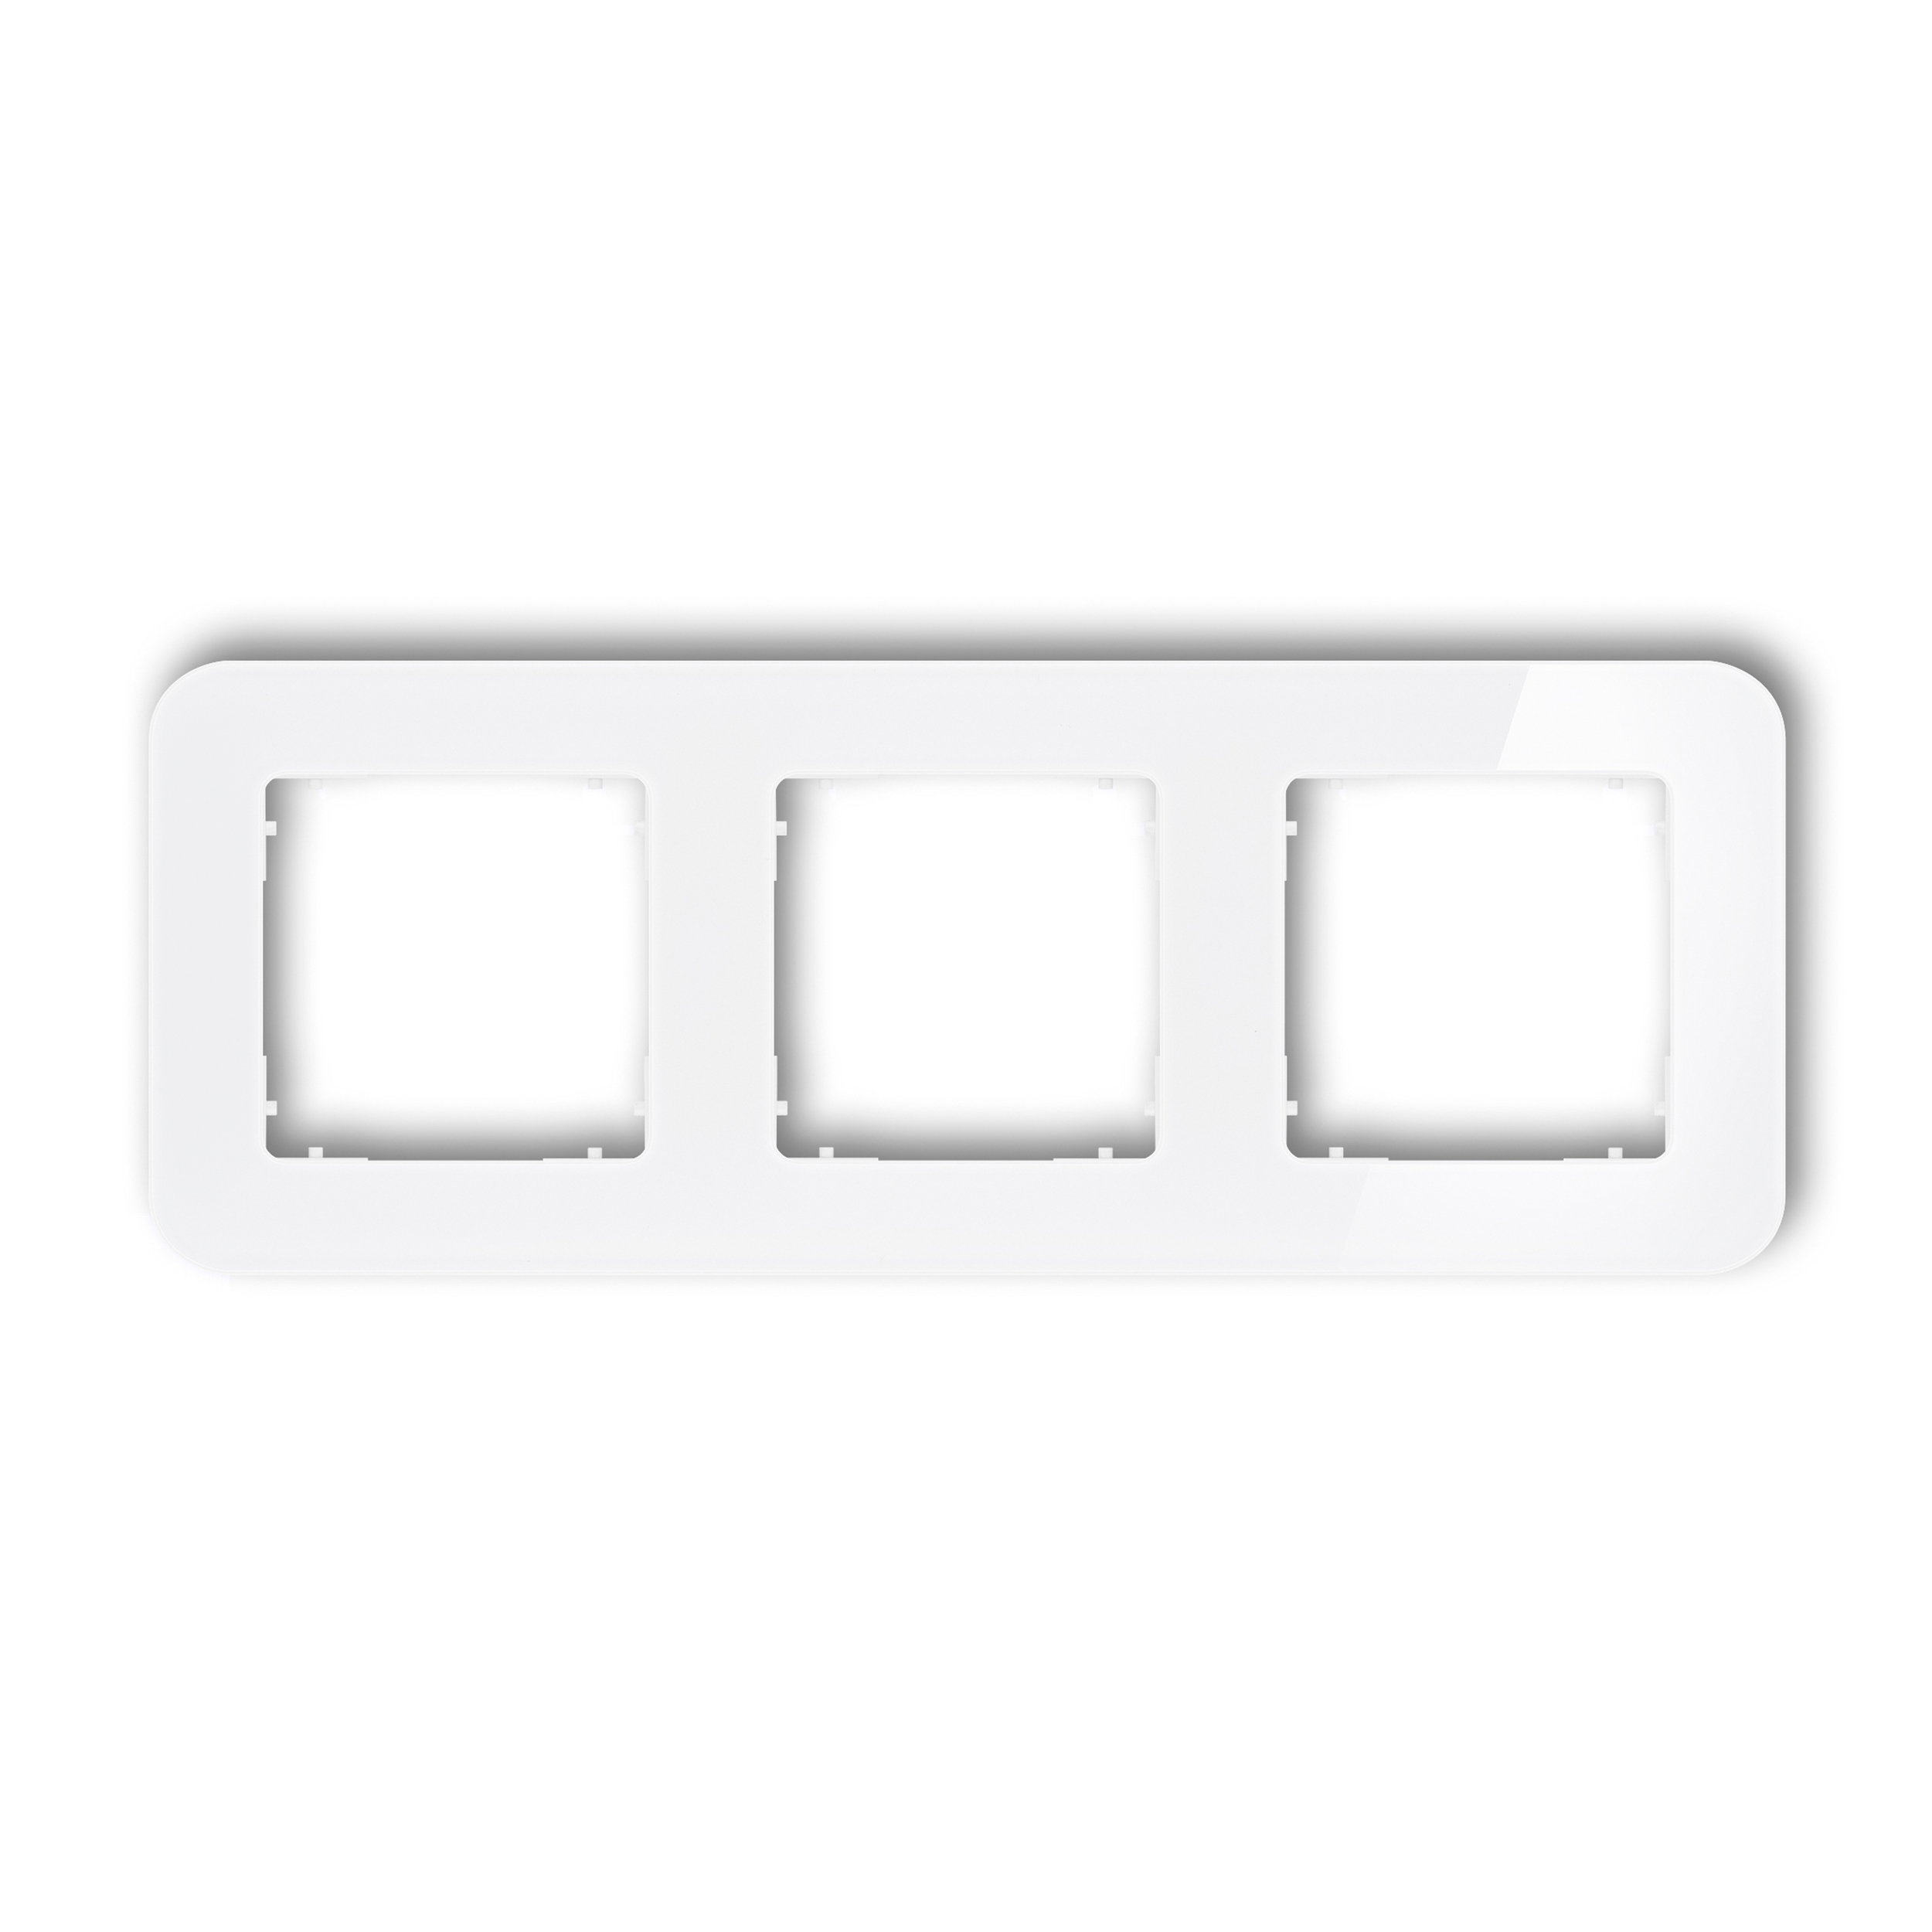 3-gang universal frame with rounded edges